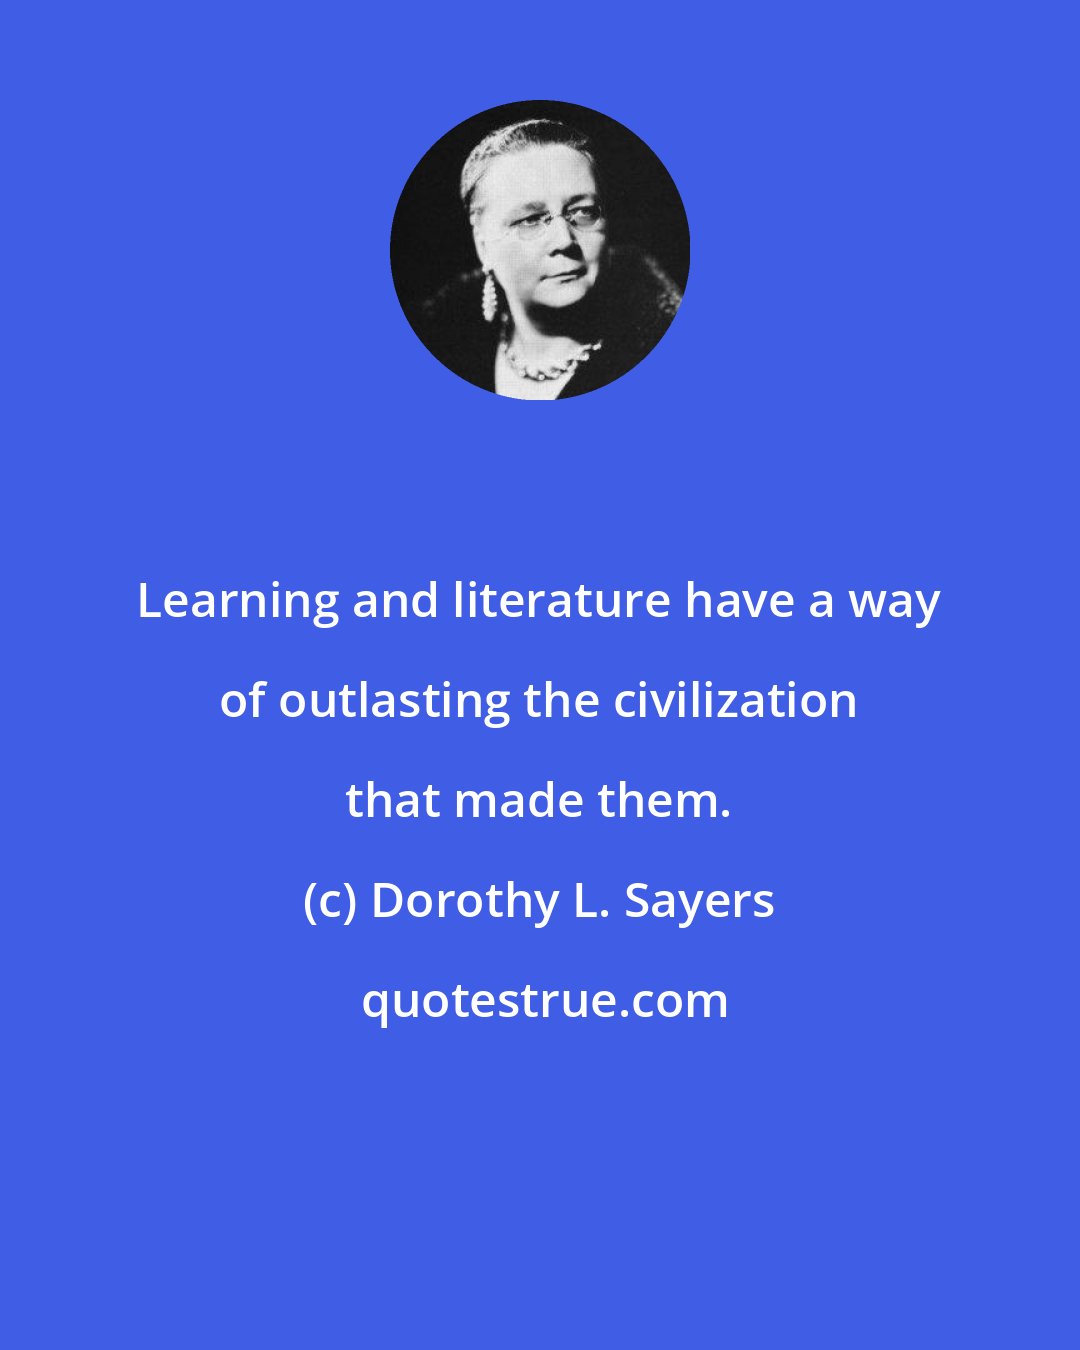 Dorothy L. Sayers: Learning and literature have a way of outlasting the civilization that made them.